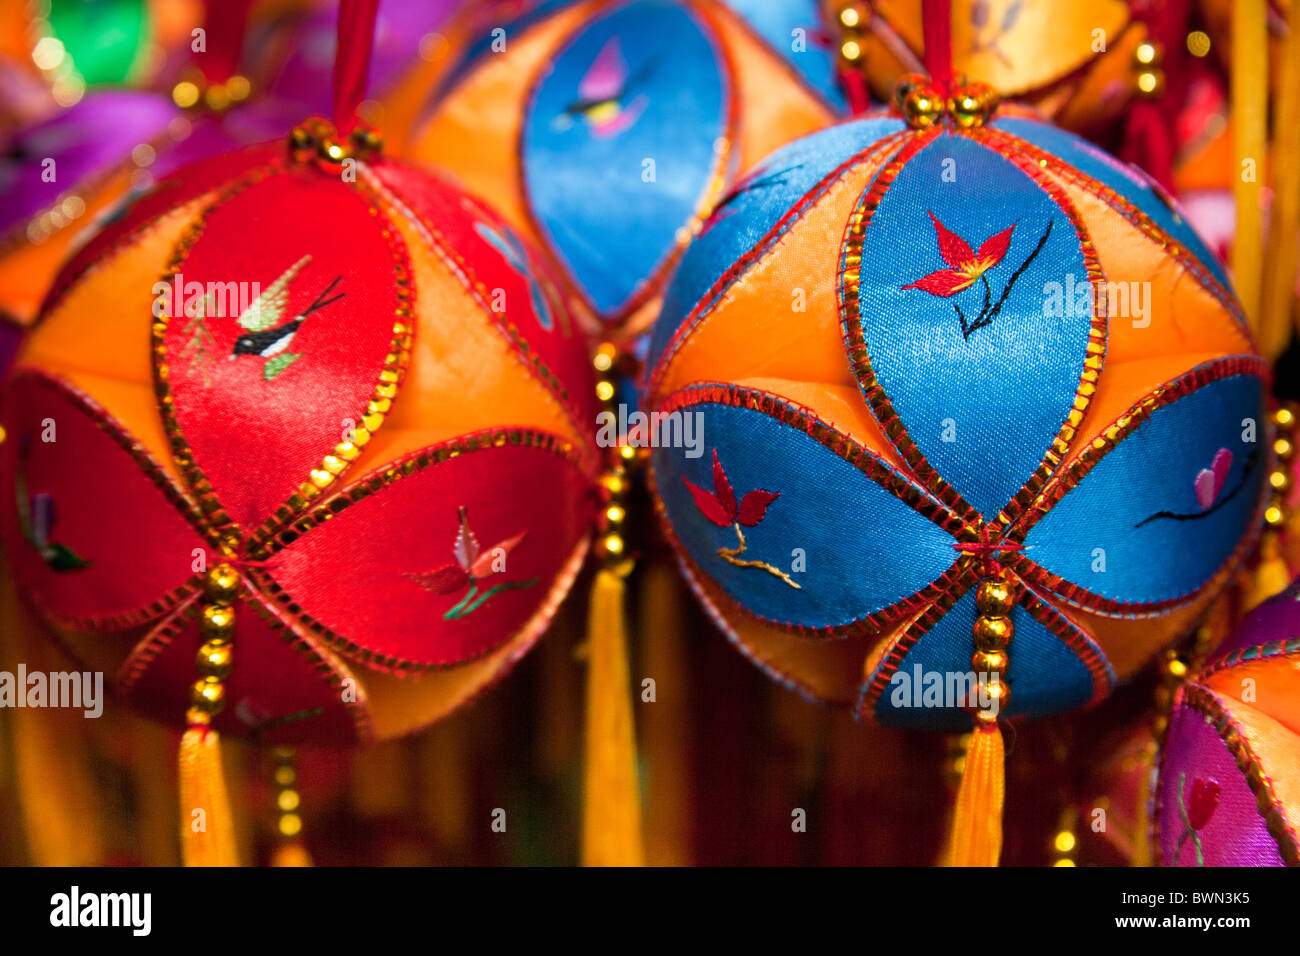 Colourful decorative Chinese baubles, China Stock Photo